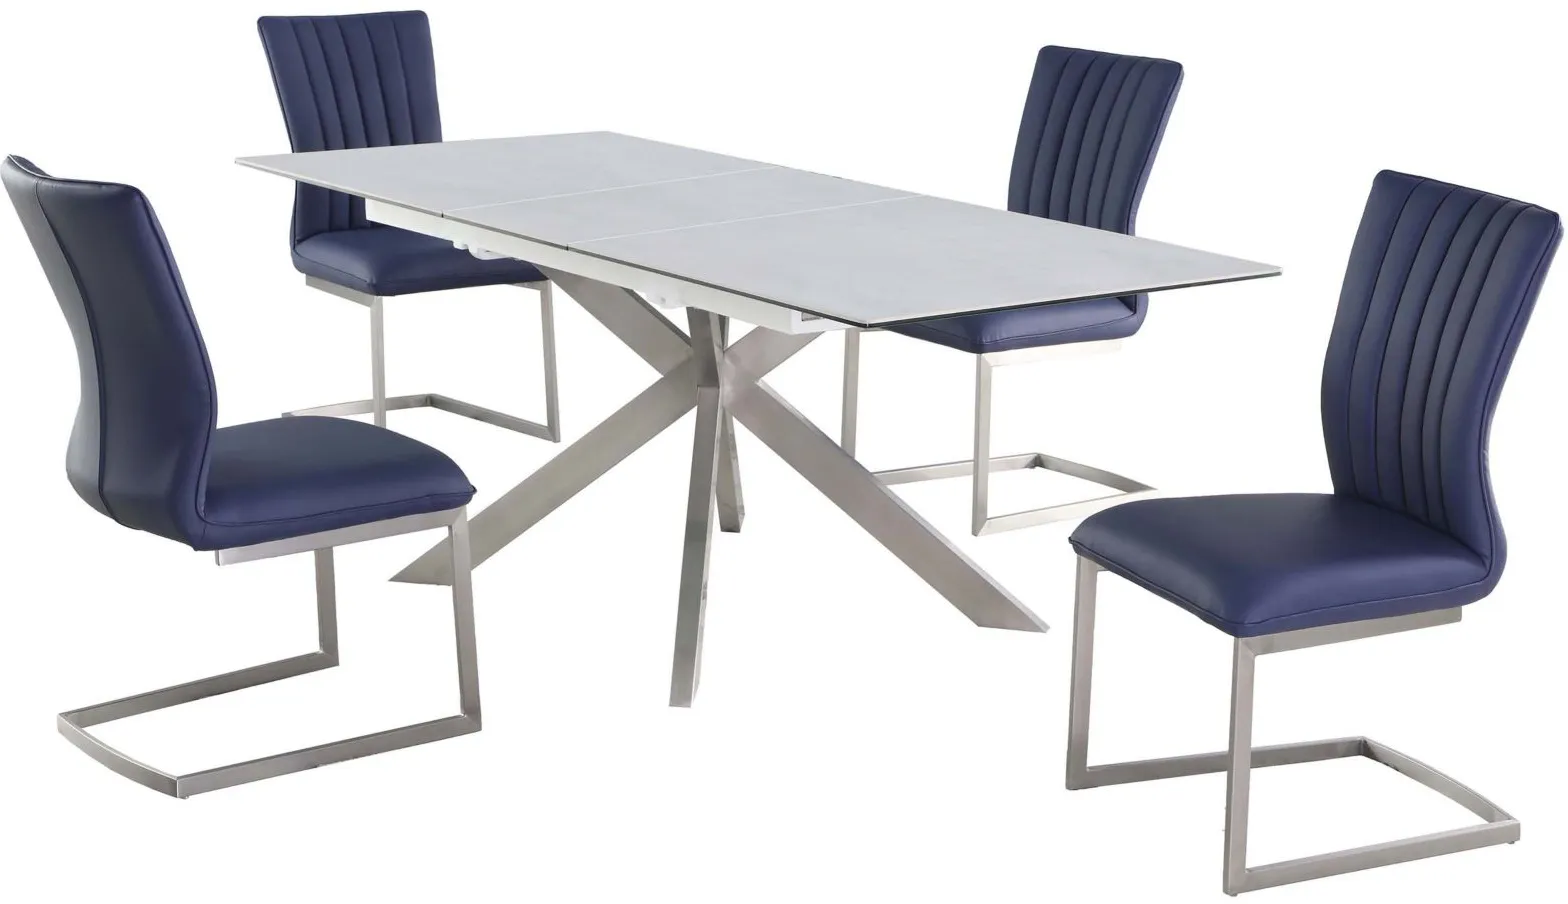 Nala 5-pc. Dining Set in Gray and Blue by Chintaly Imports